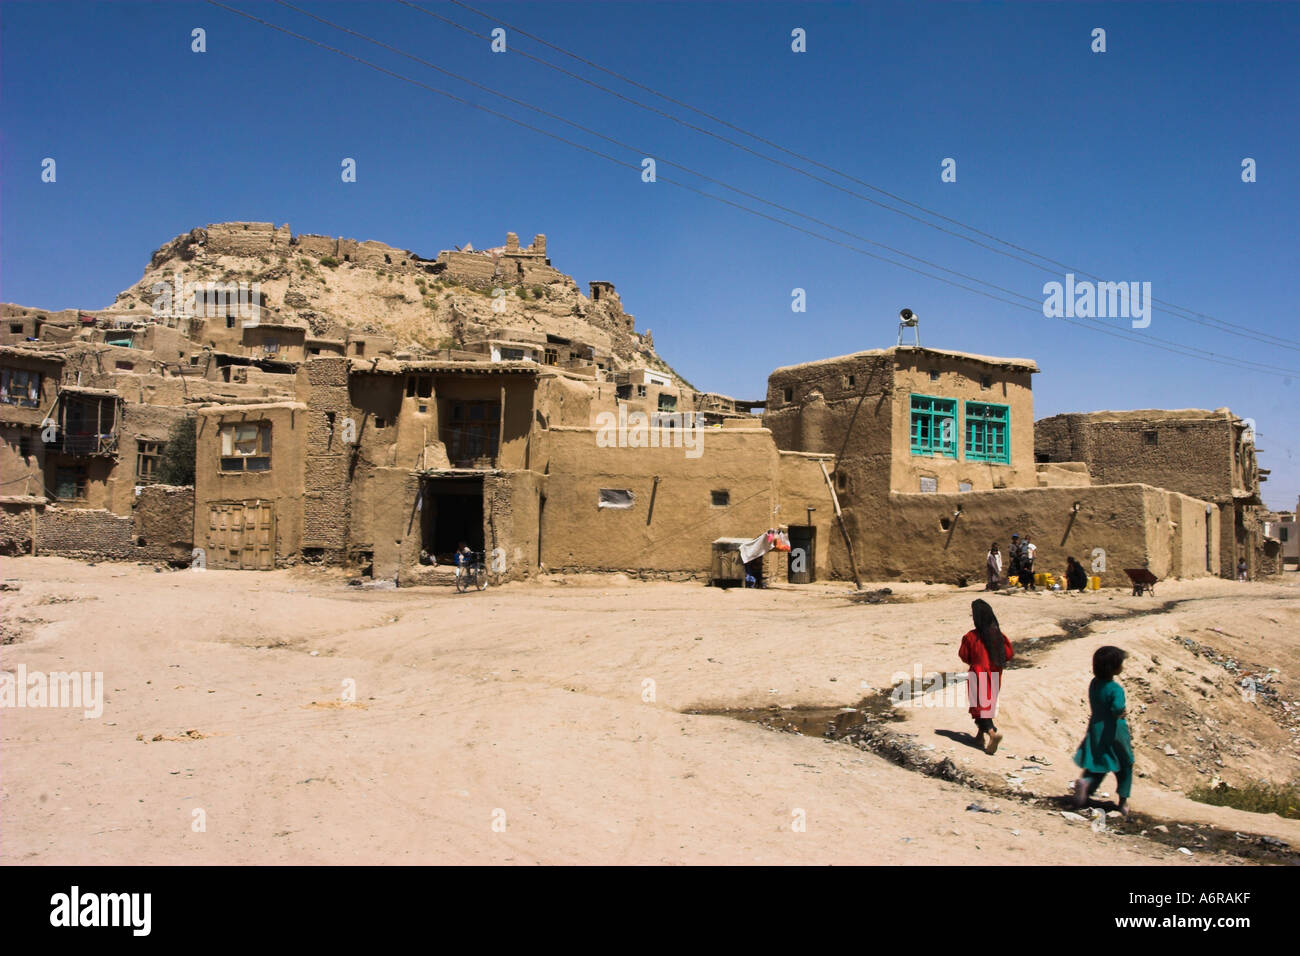 AFGHANISTAN Ghazni Houses inside the ancient city walls with the Citadel in the background Stock Photo